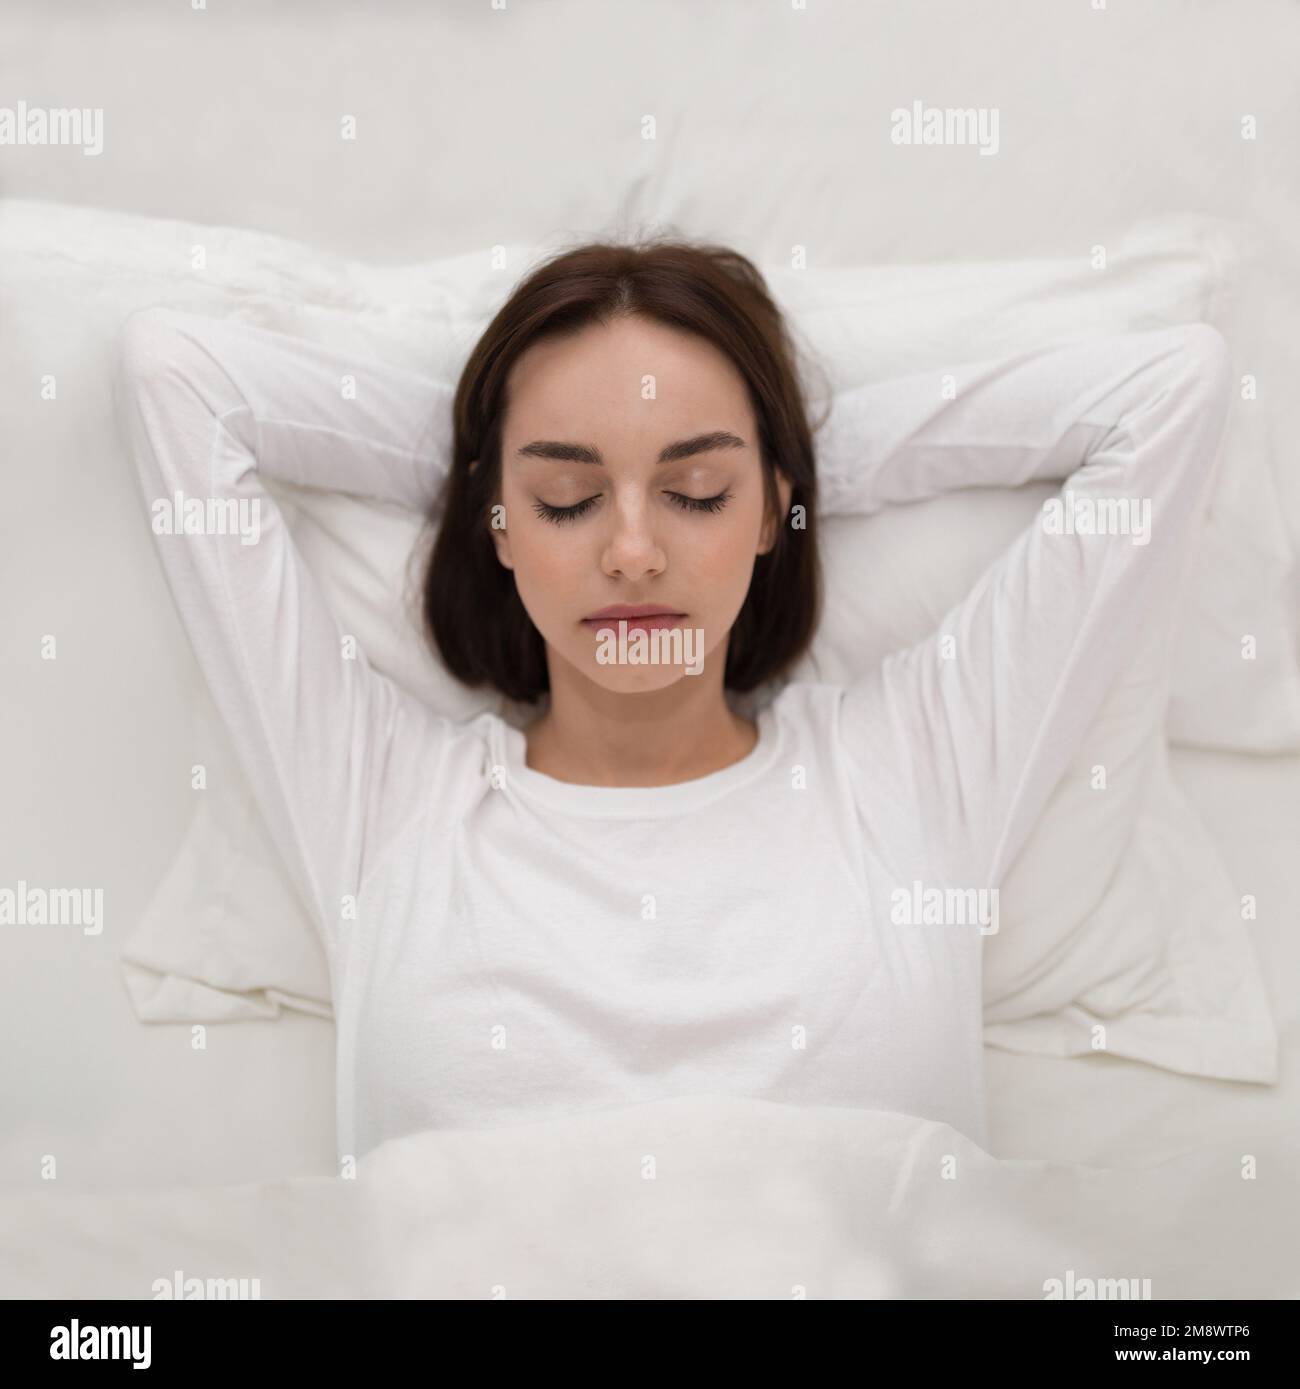 Top view of young woman sleeping with hands under head Stock Photo